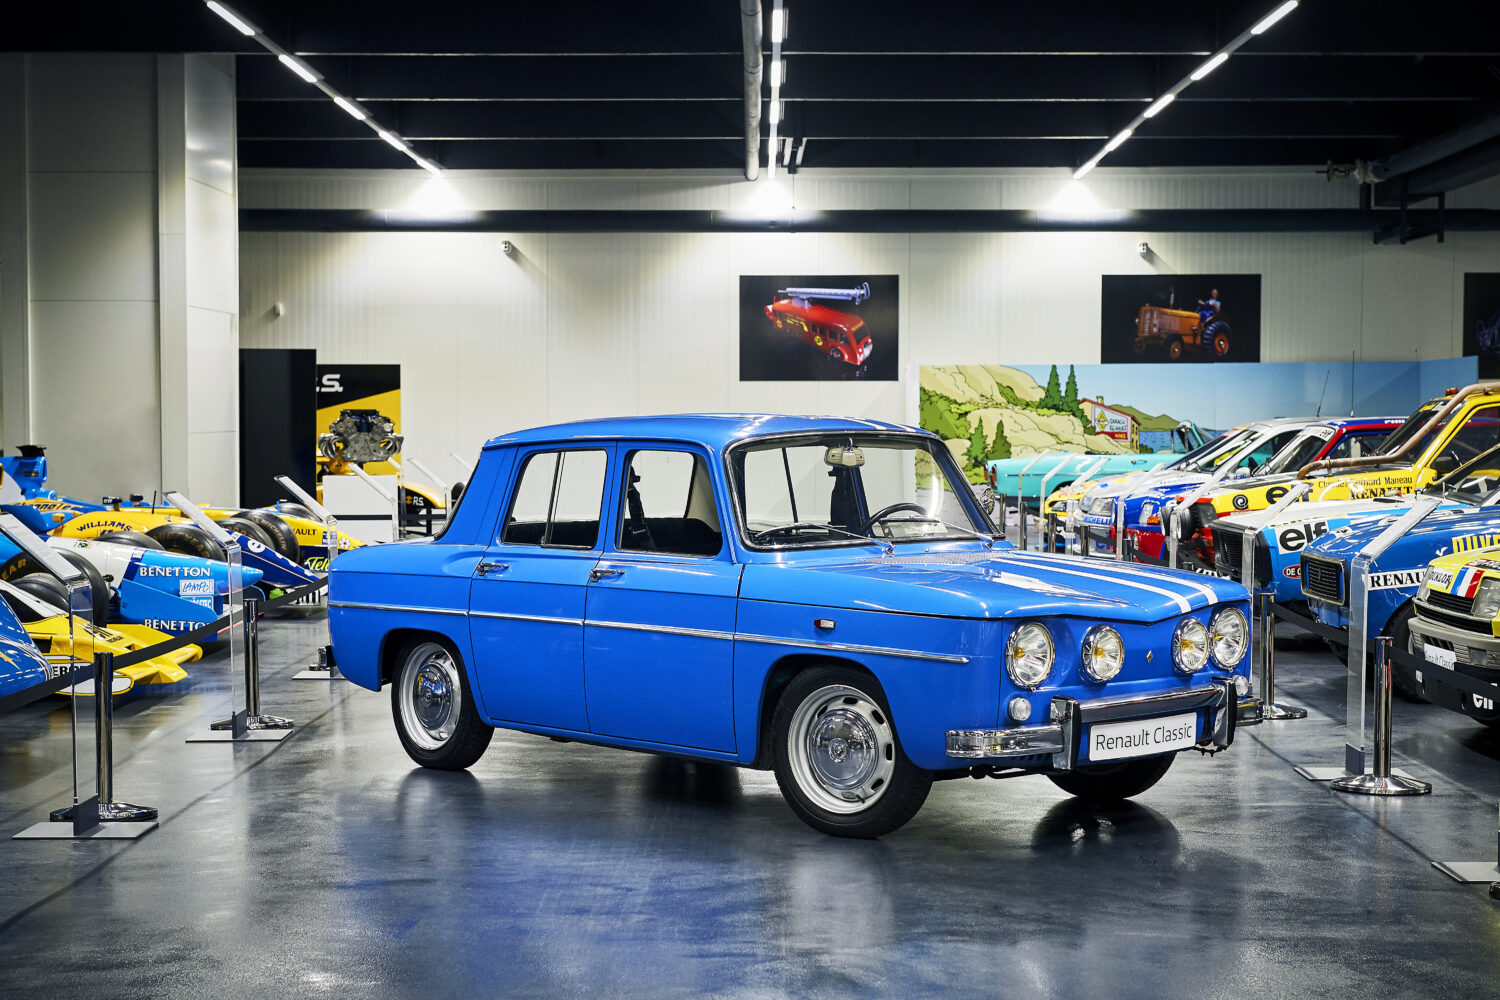 2018 - Collection Renault Classic.jpg